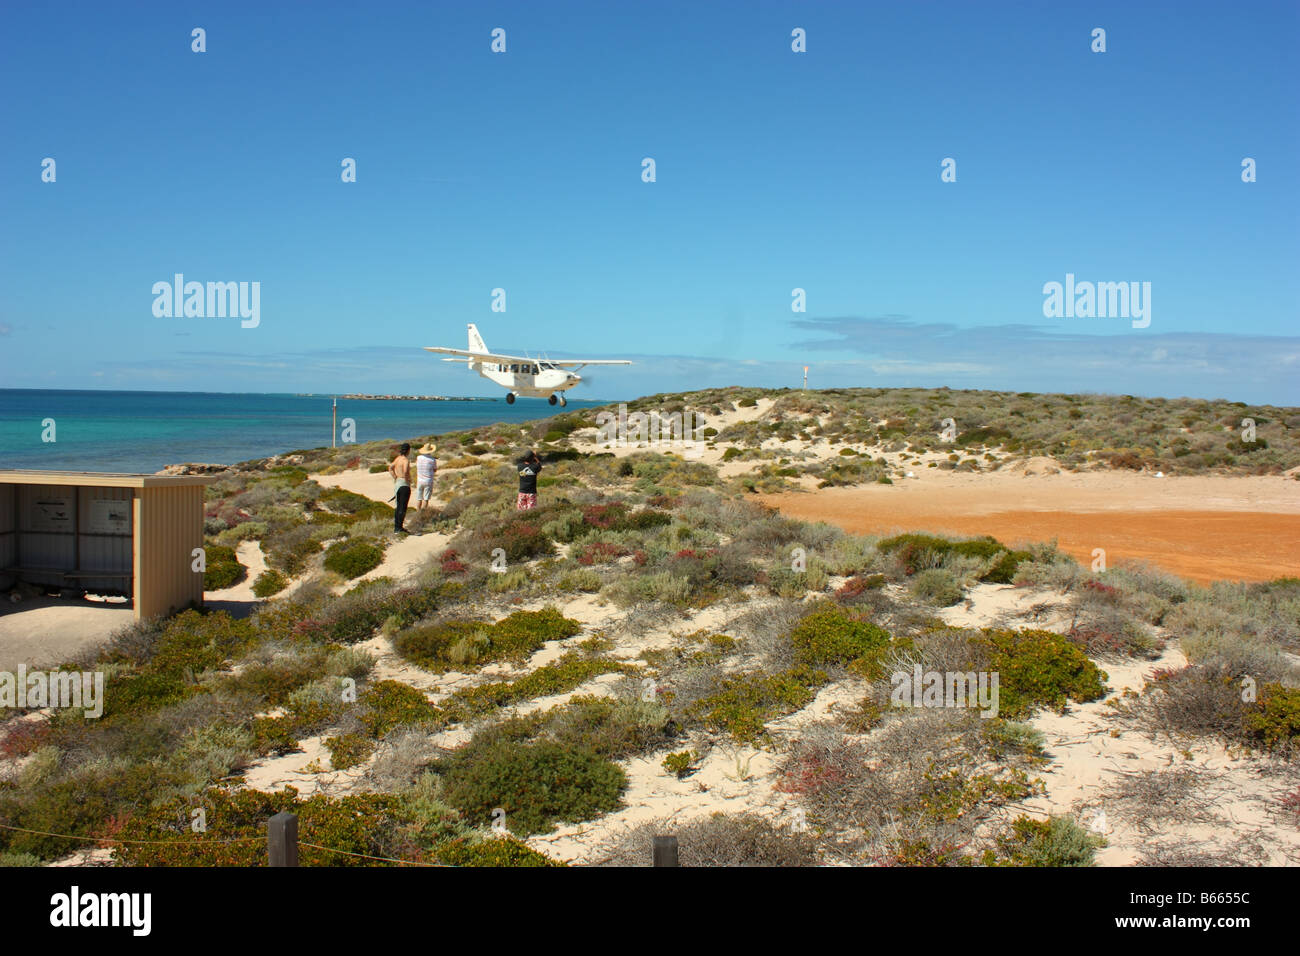 batavia airlines landing on west wallaby island on the abrolhos island chain Stock Photo